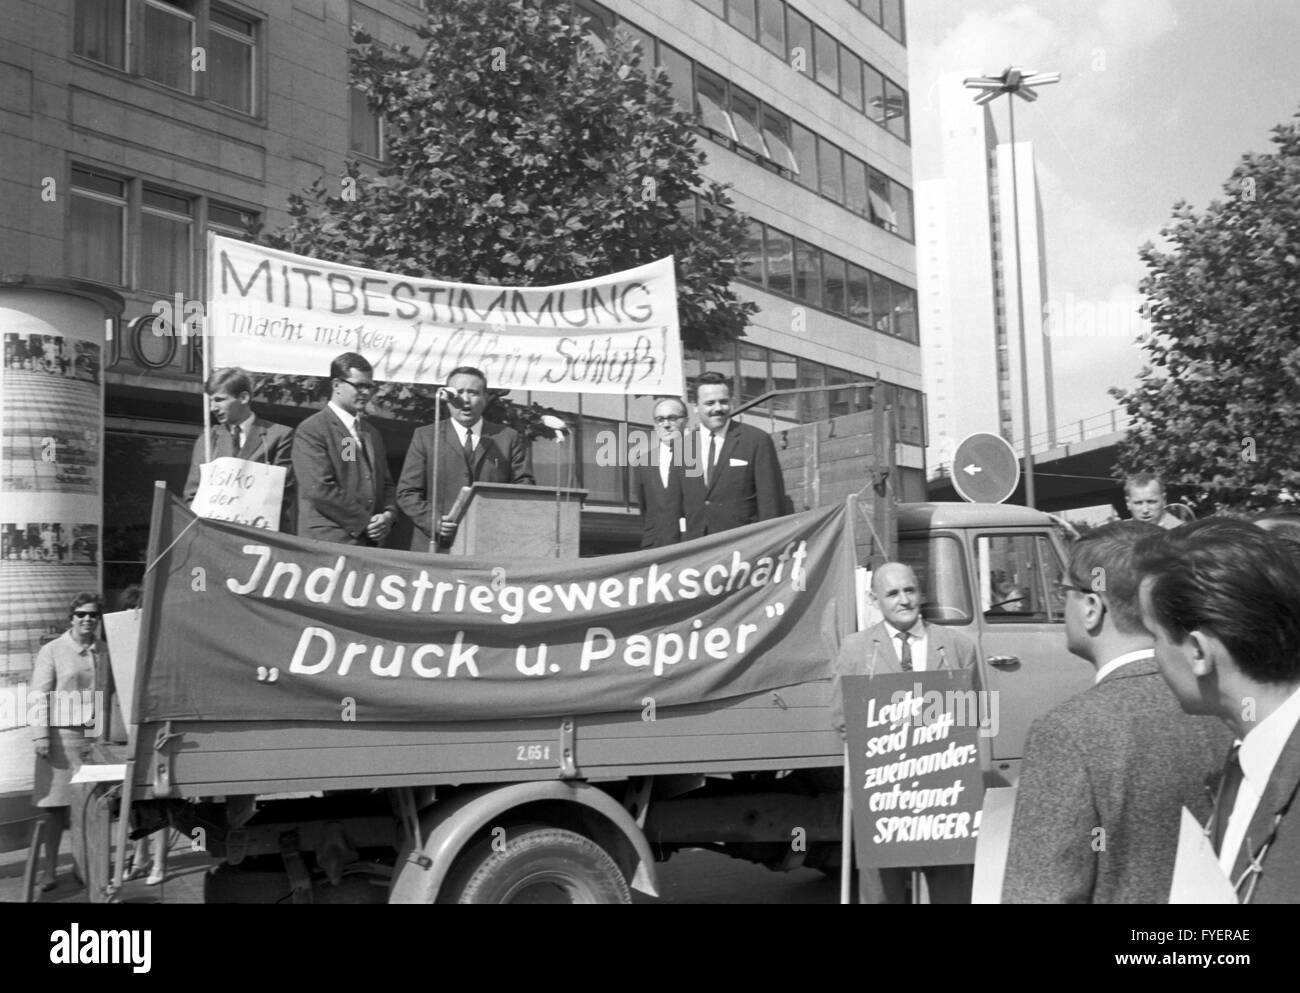 Several hundred people demonstrate against the cessation of the boulevard magazine 'Mittag' and the loss of 180 jobs in Duesseldorf on 23 September 1967. Stock Photo